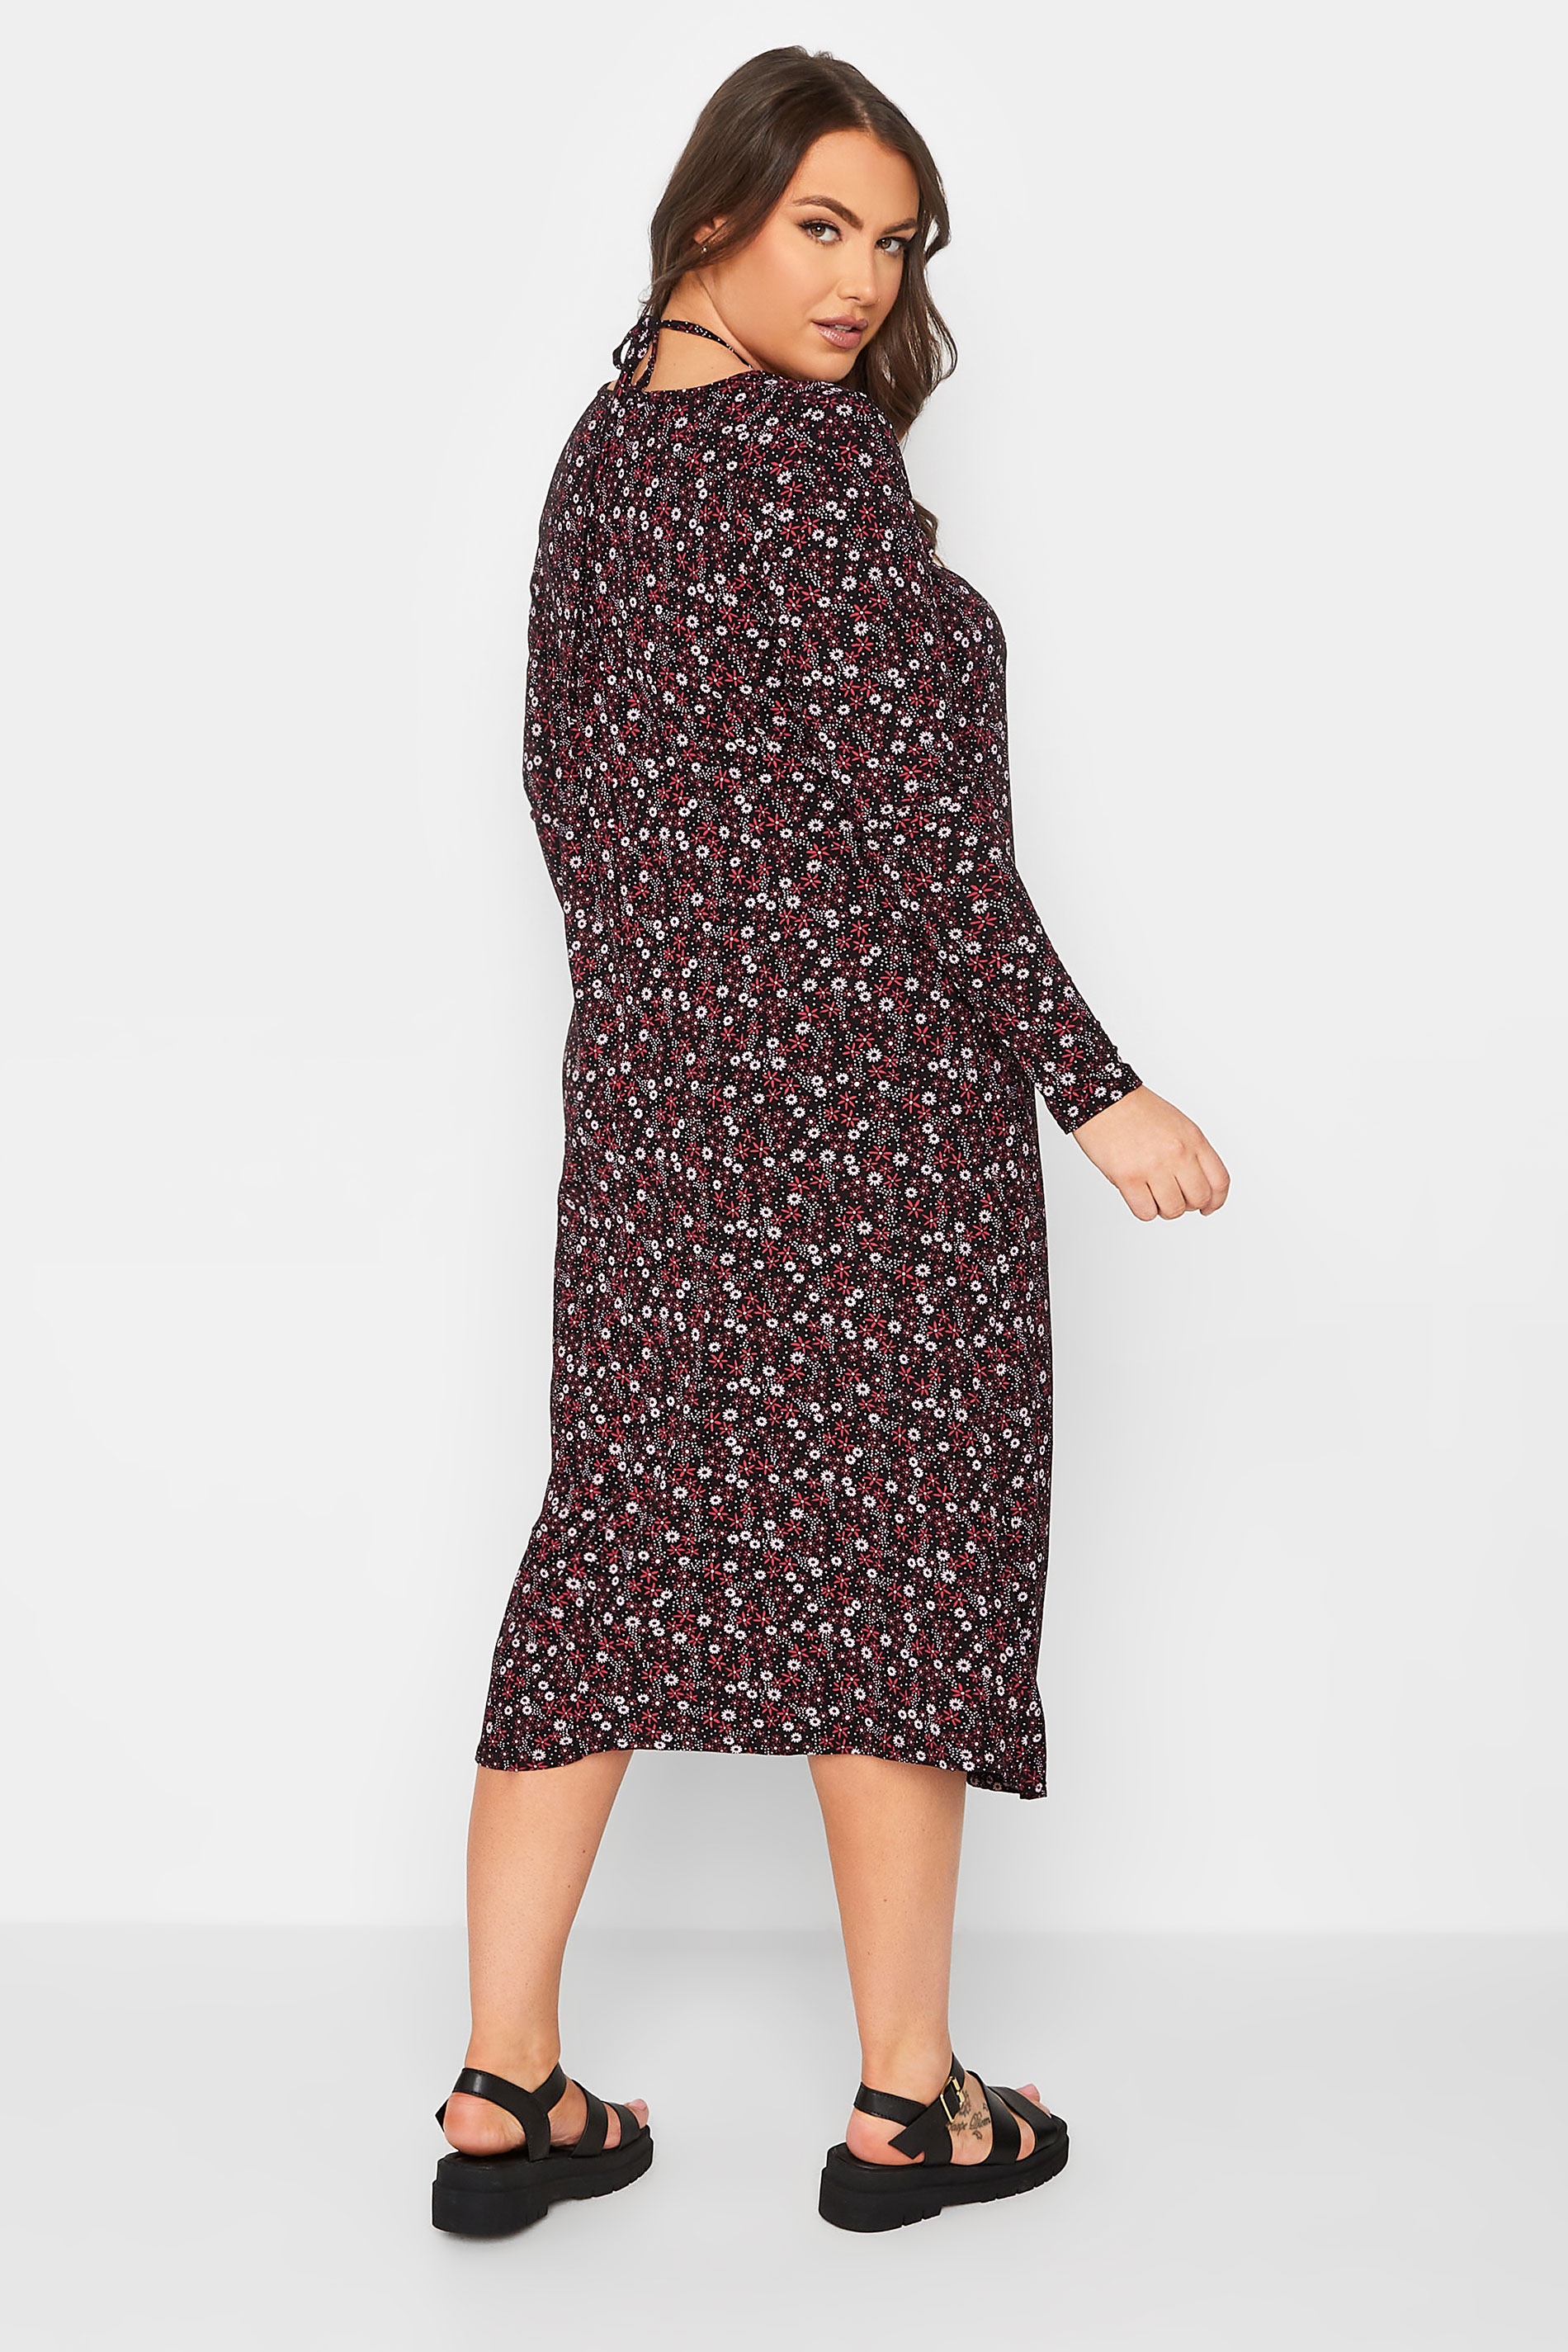 LIMITED COLLECTION Plus Size Black Ditsy Print Keyhole Tie Neck Midaxi Dress | Yours Clothing 3